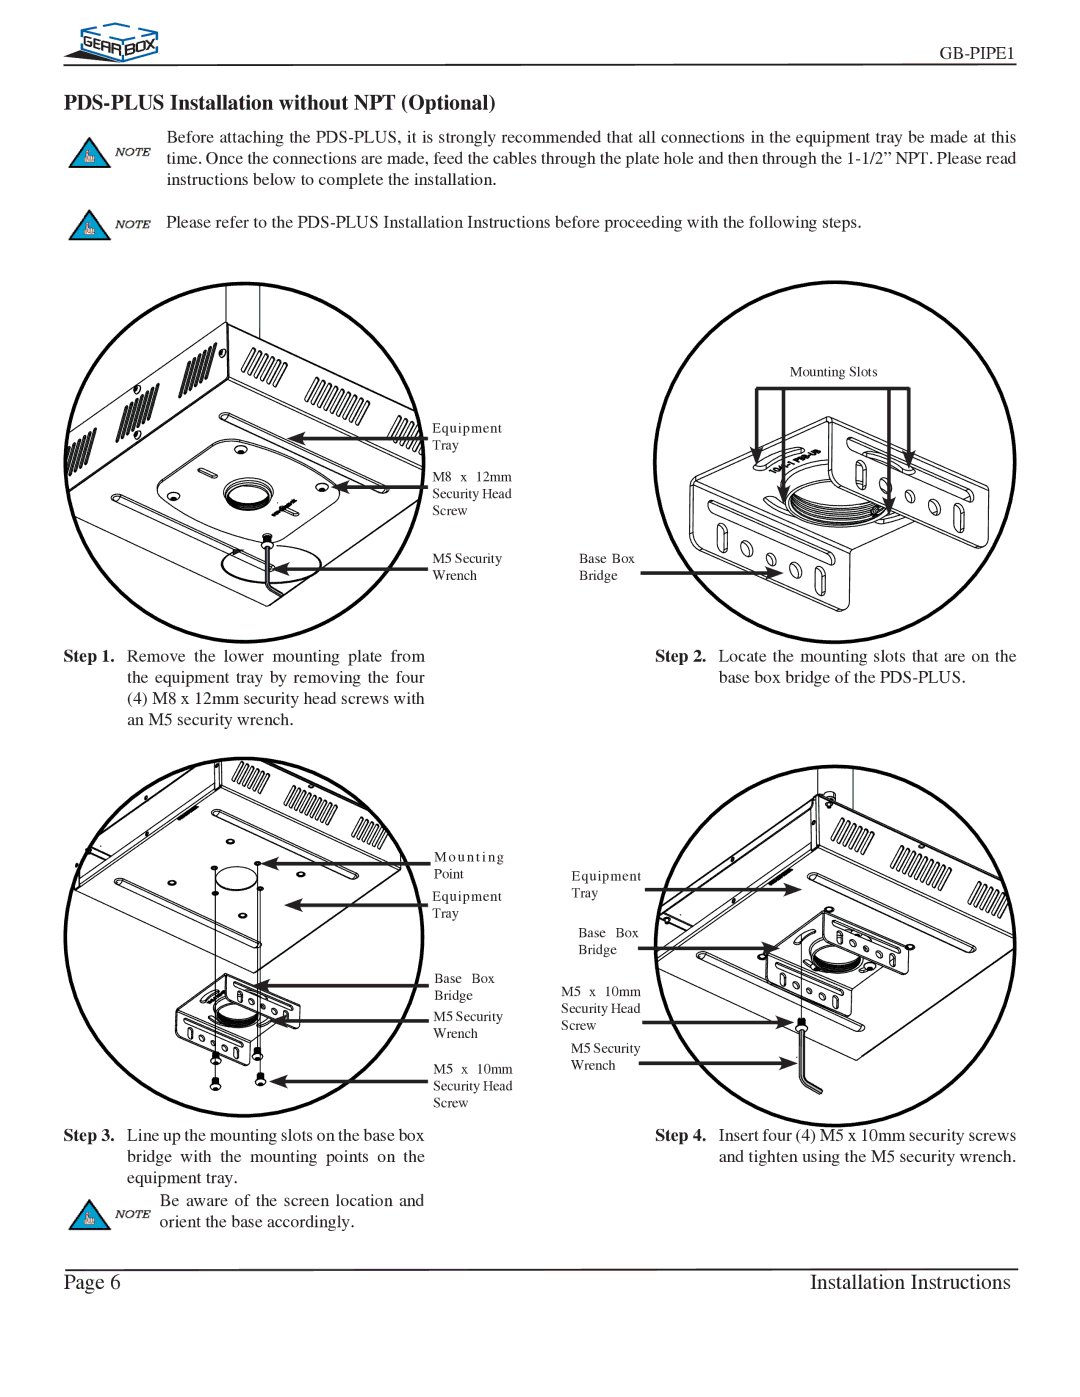 Premier Mounts GB-PIPE1B installation instructions PDS-PLUS Installation without NPT Optional 